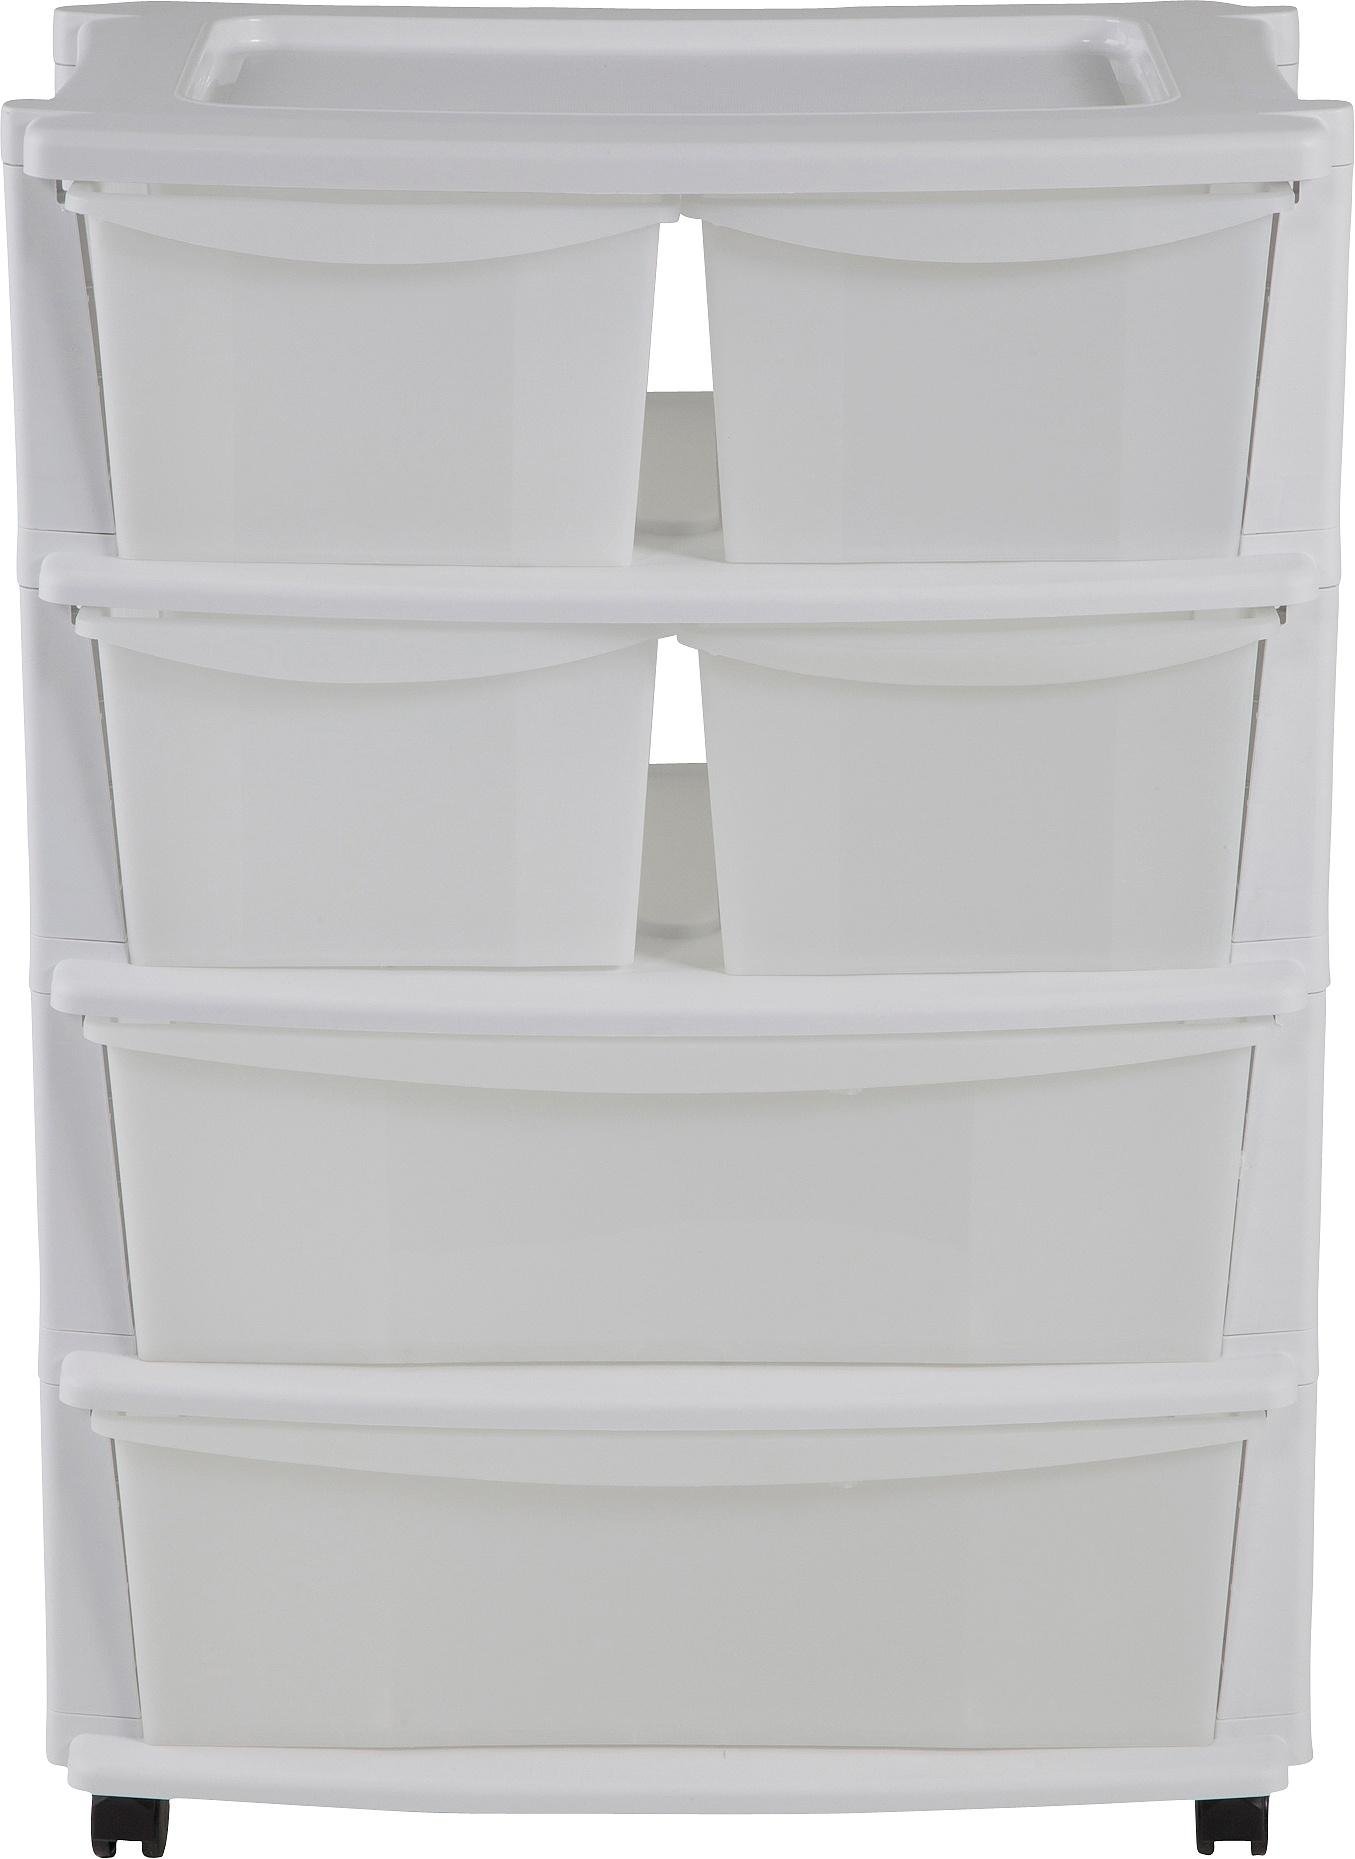 Argos Home 6 Drawer White Plastic Wide Tower Storage Unit review